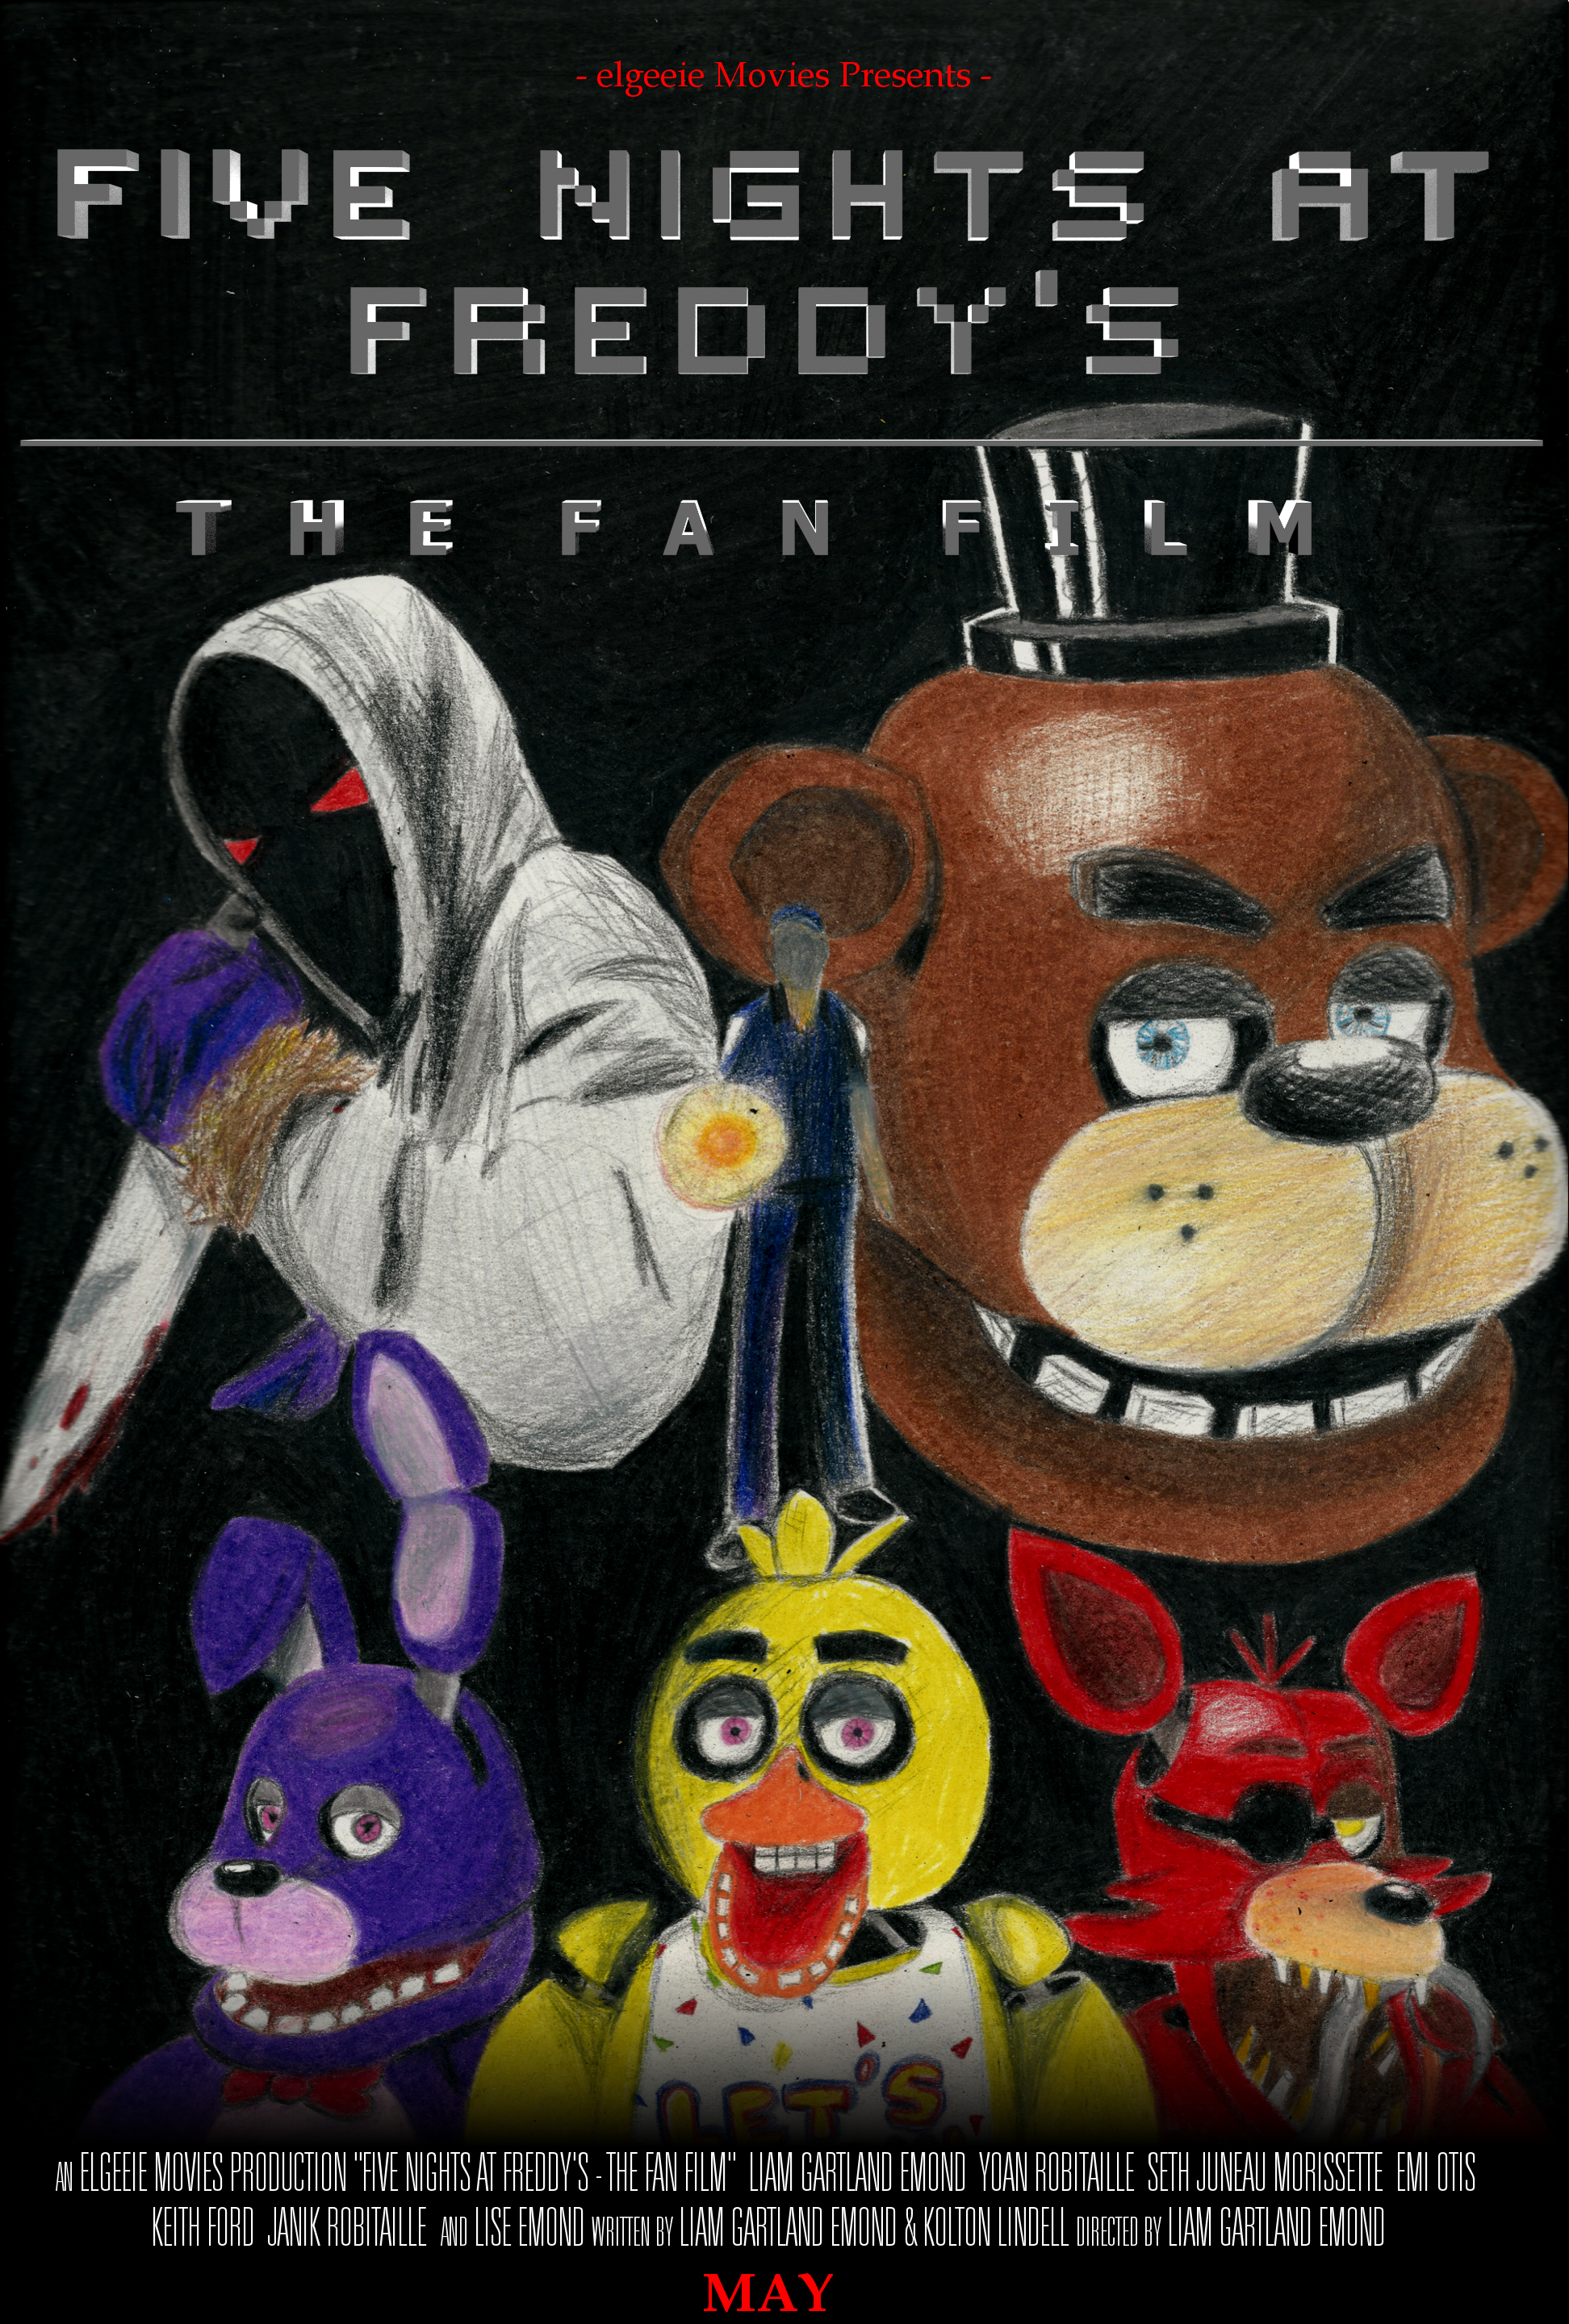 Five Nights at Freddy's: The Movie Is Finally Here – The Wrangler